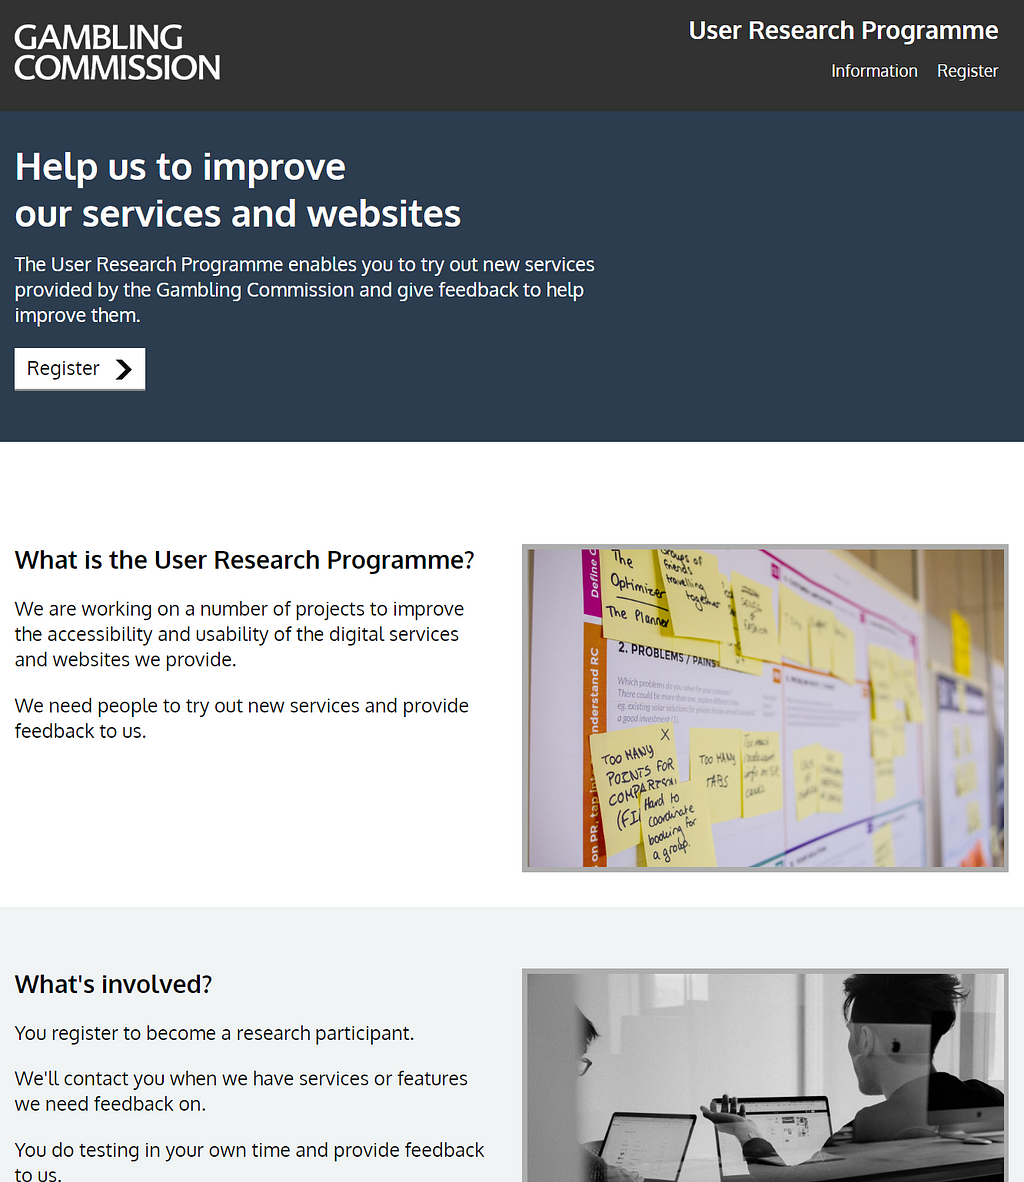 Screenshot shows a register button and sections explaining what the user research programme is about and what’s involved.